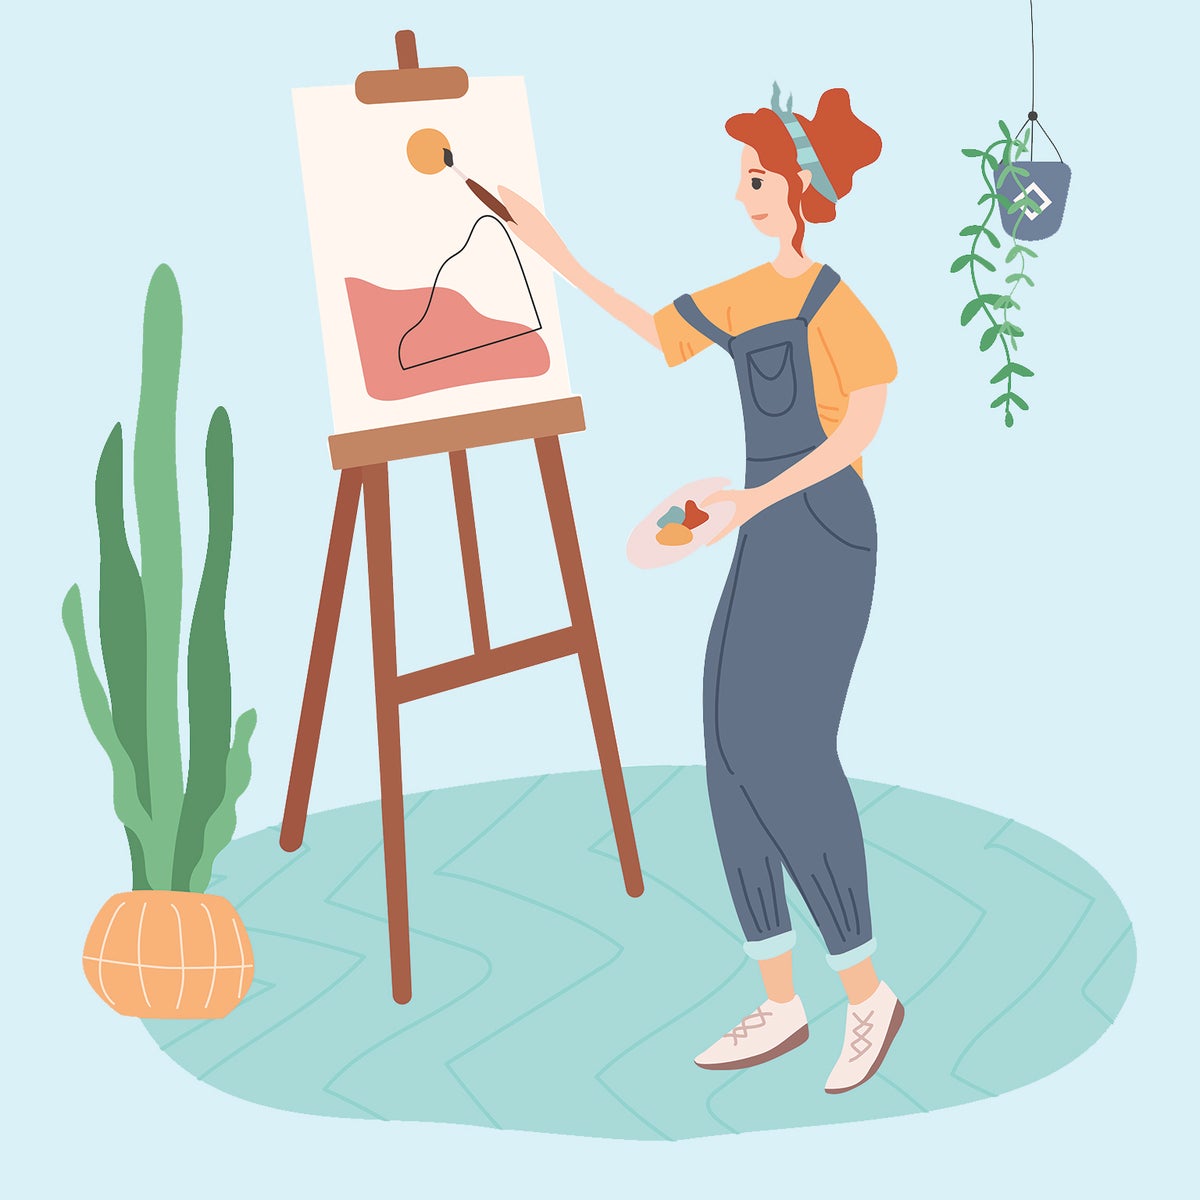 Art for beginners: How to draw, paint and more, according to artists